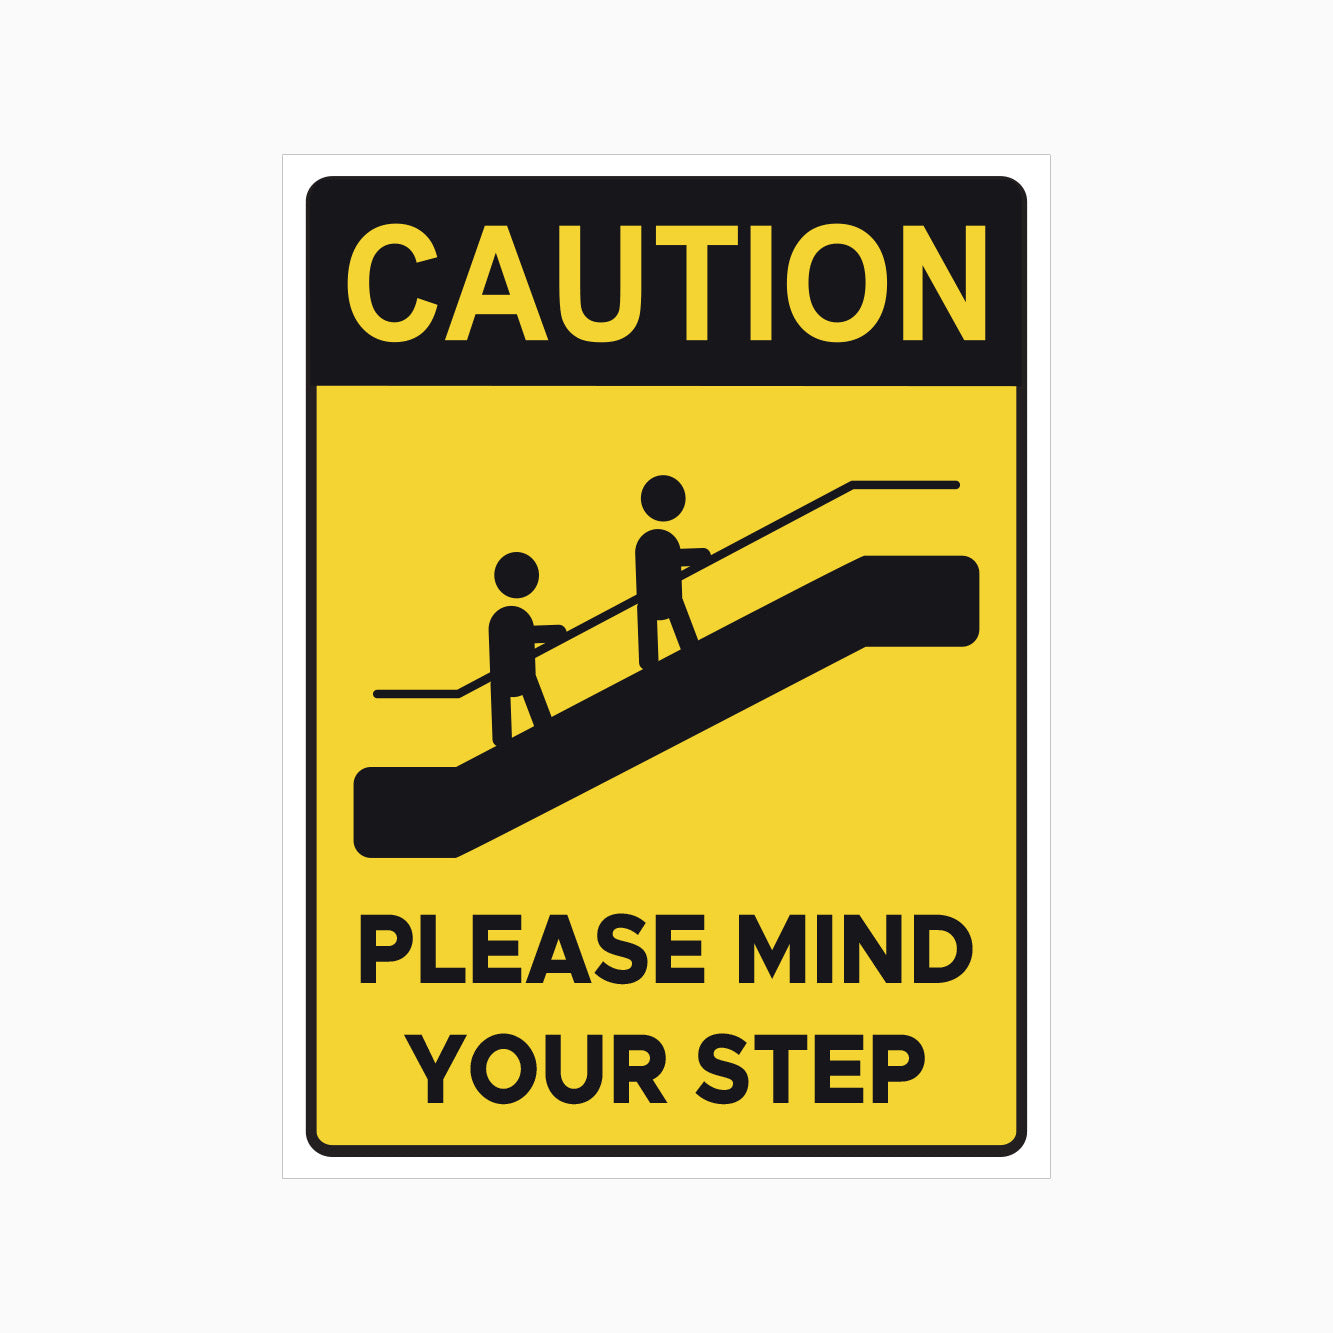 CAUTION SIGN - PLEASE MIND YOUR STEP SIGN